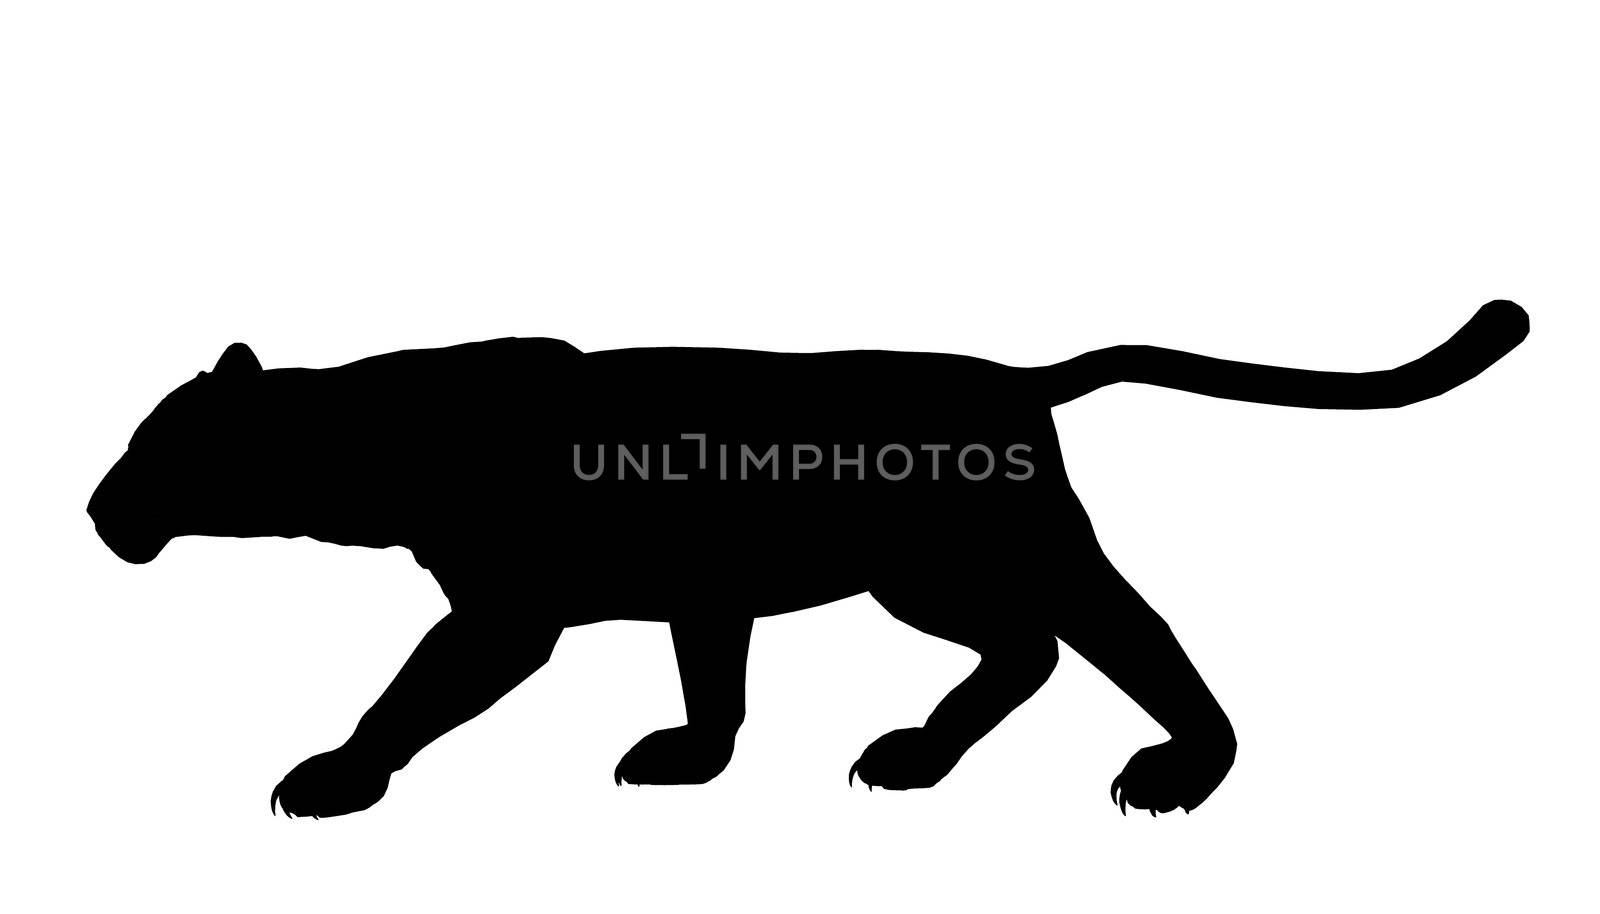 Black panther art illustration silhouette on a white background